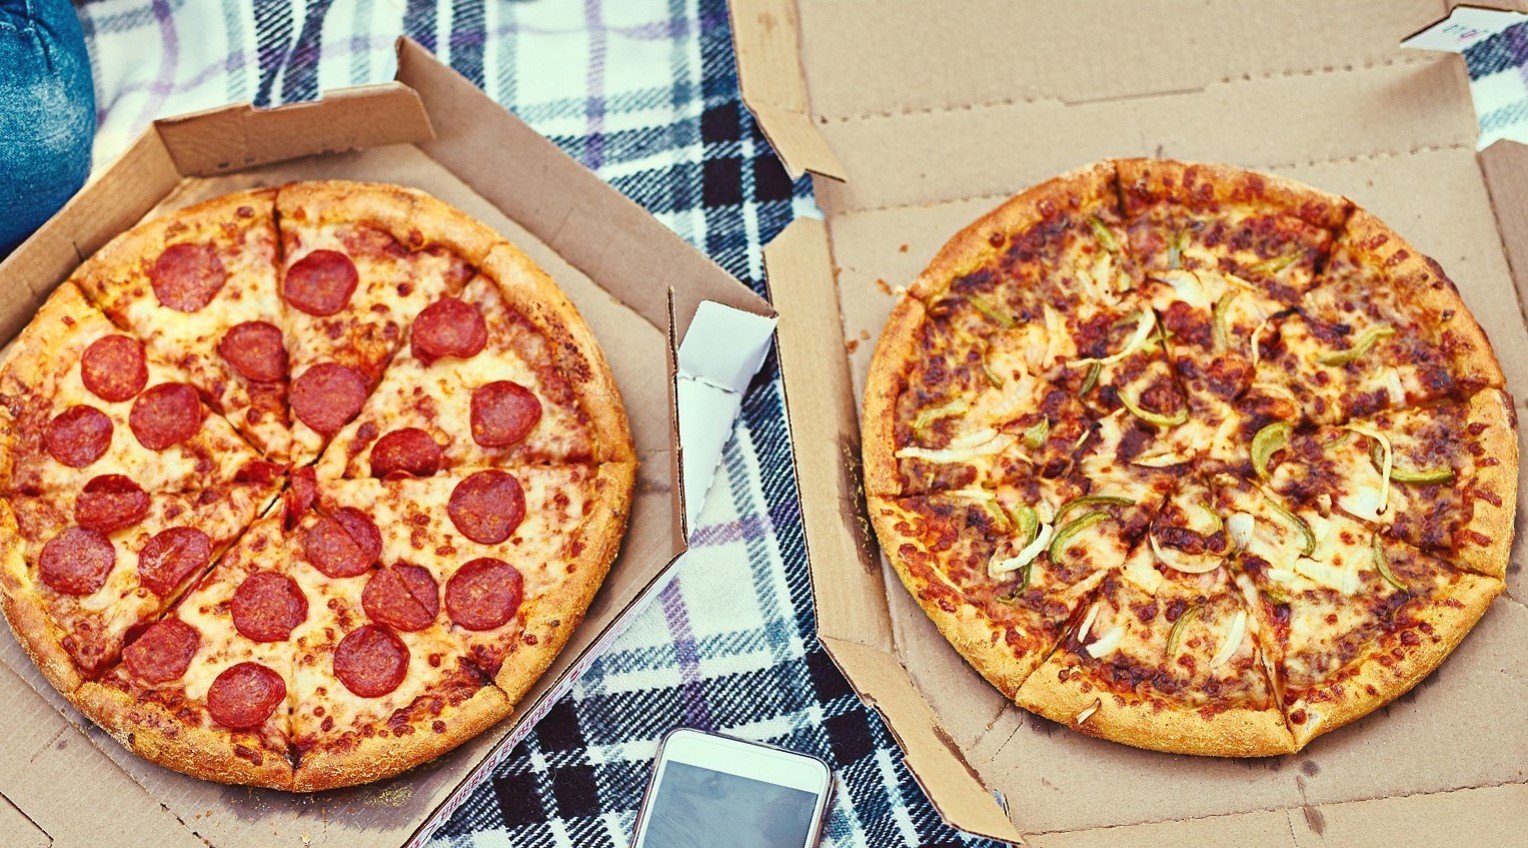 Man bought two pizzas with Bitcoin 13 years ago, now valued at a staggering $437 Million 1